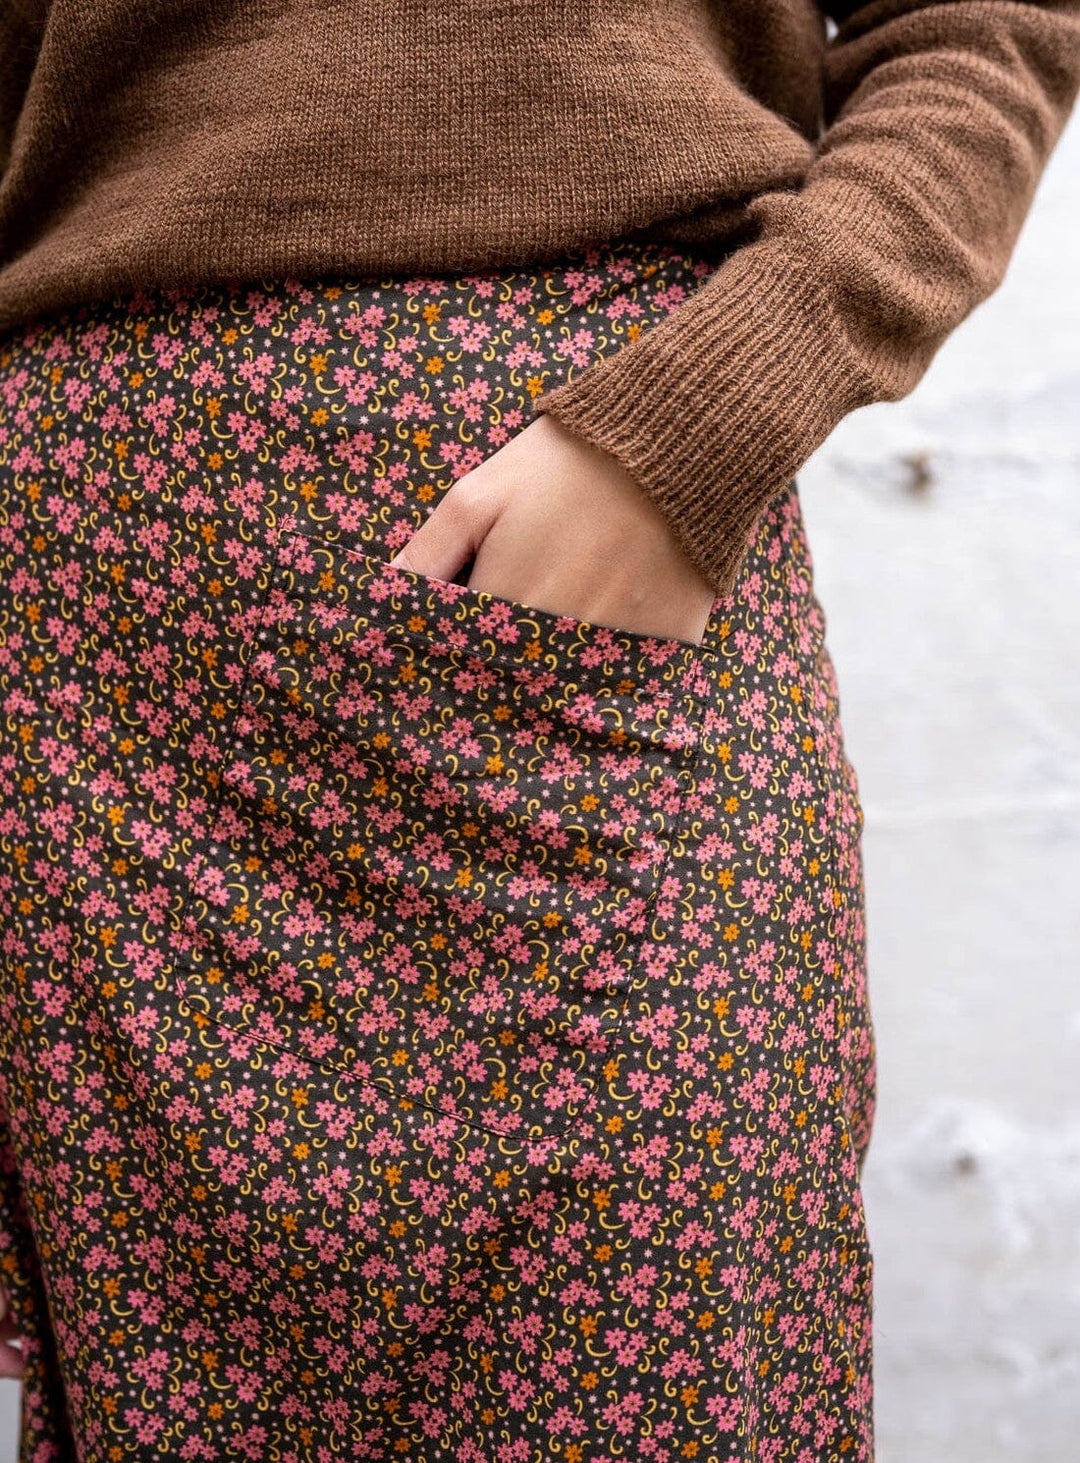 Daisy Wrap Cotton Skirt Faded Flower Skirts YBDFinds 